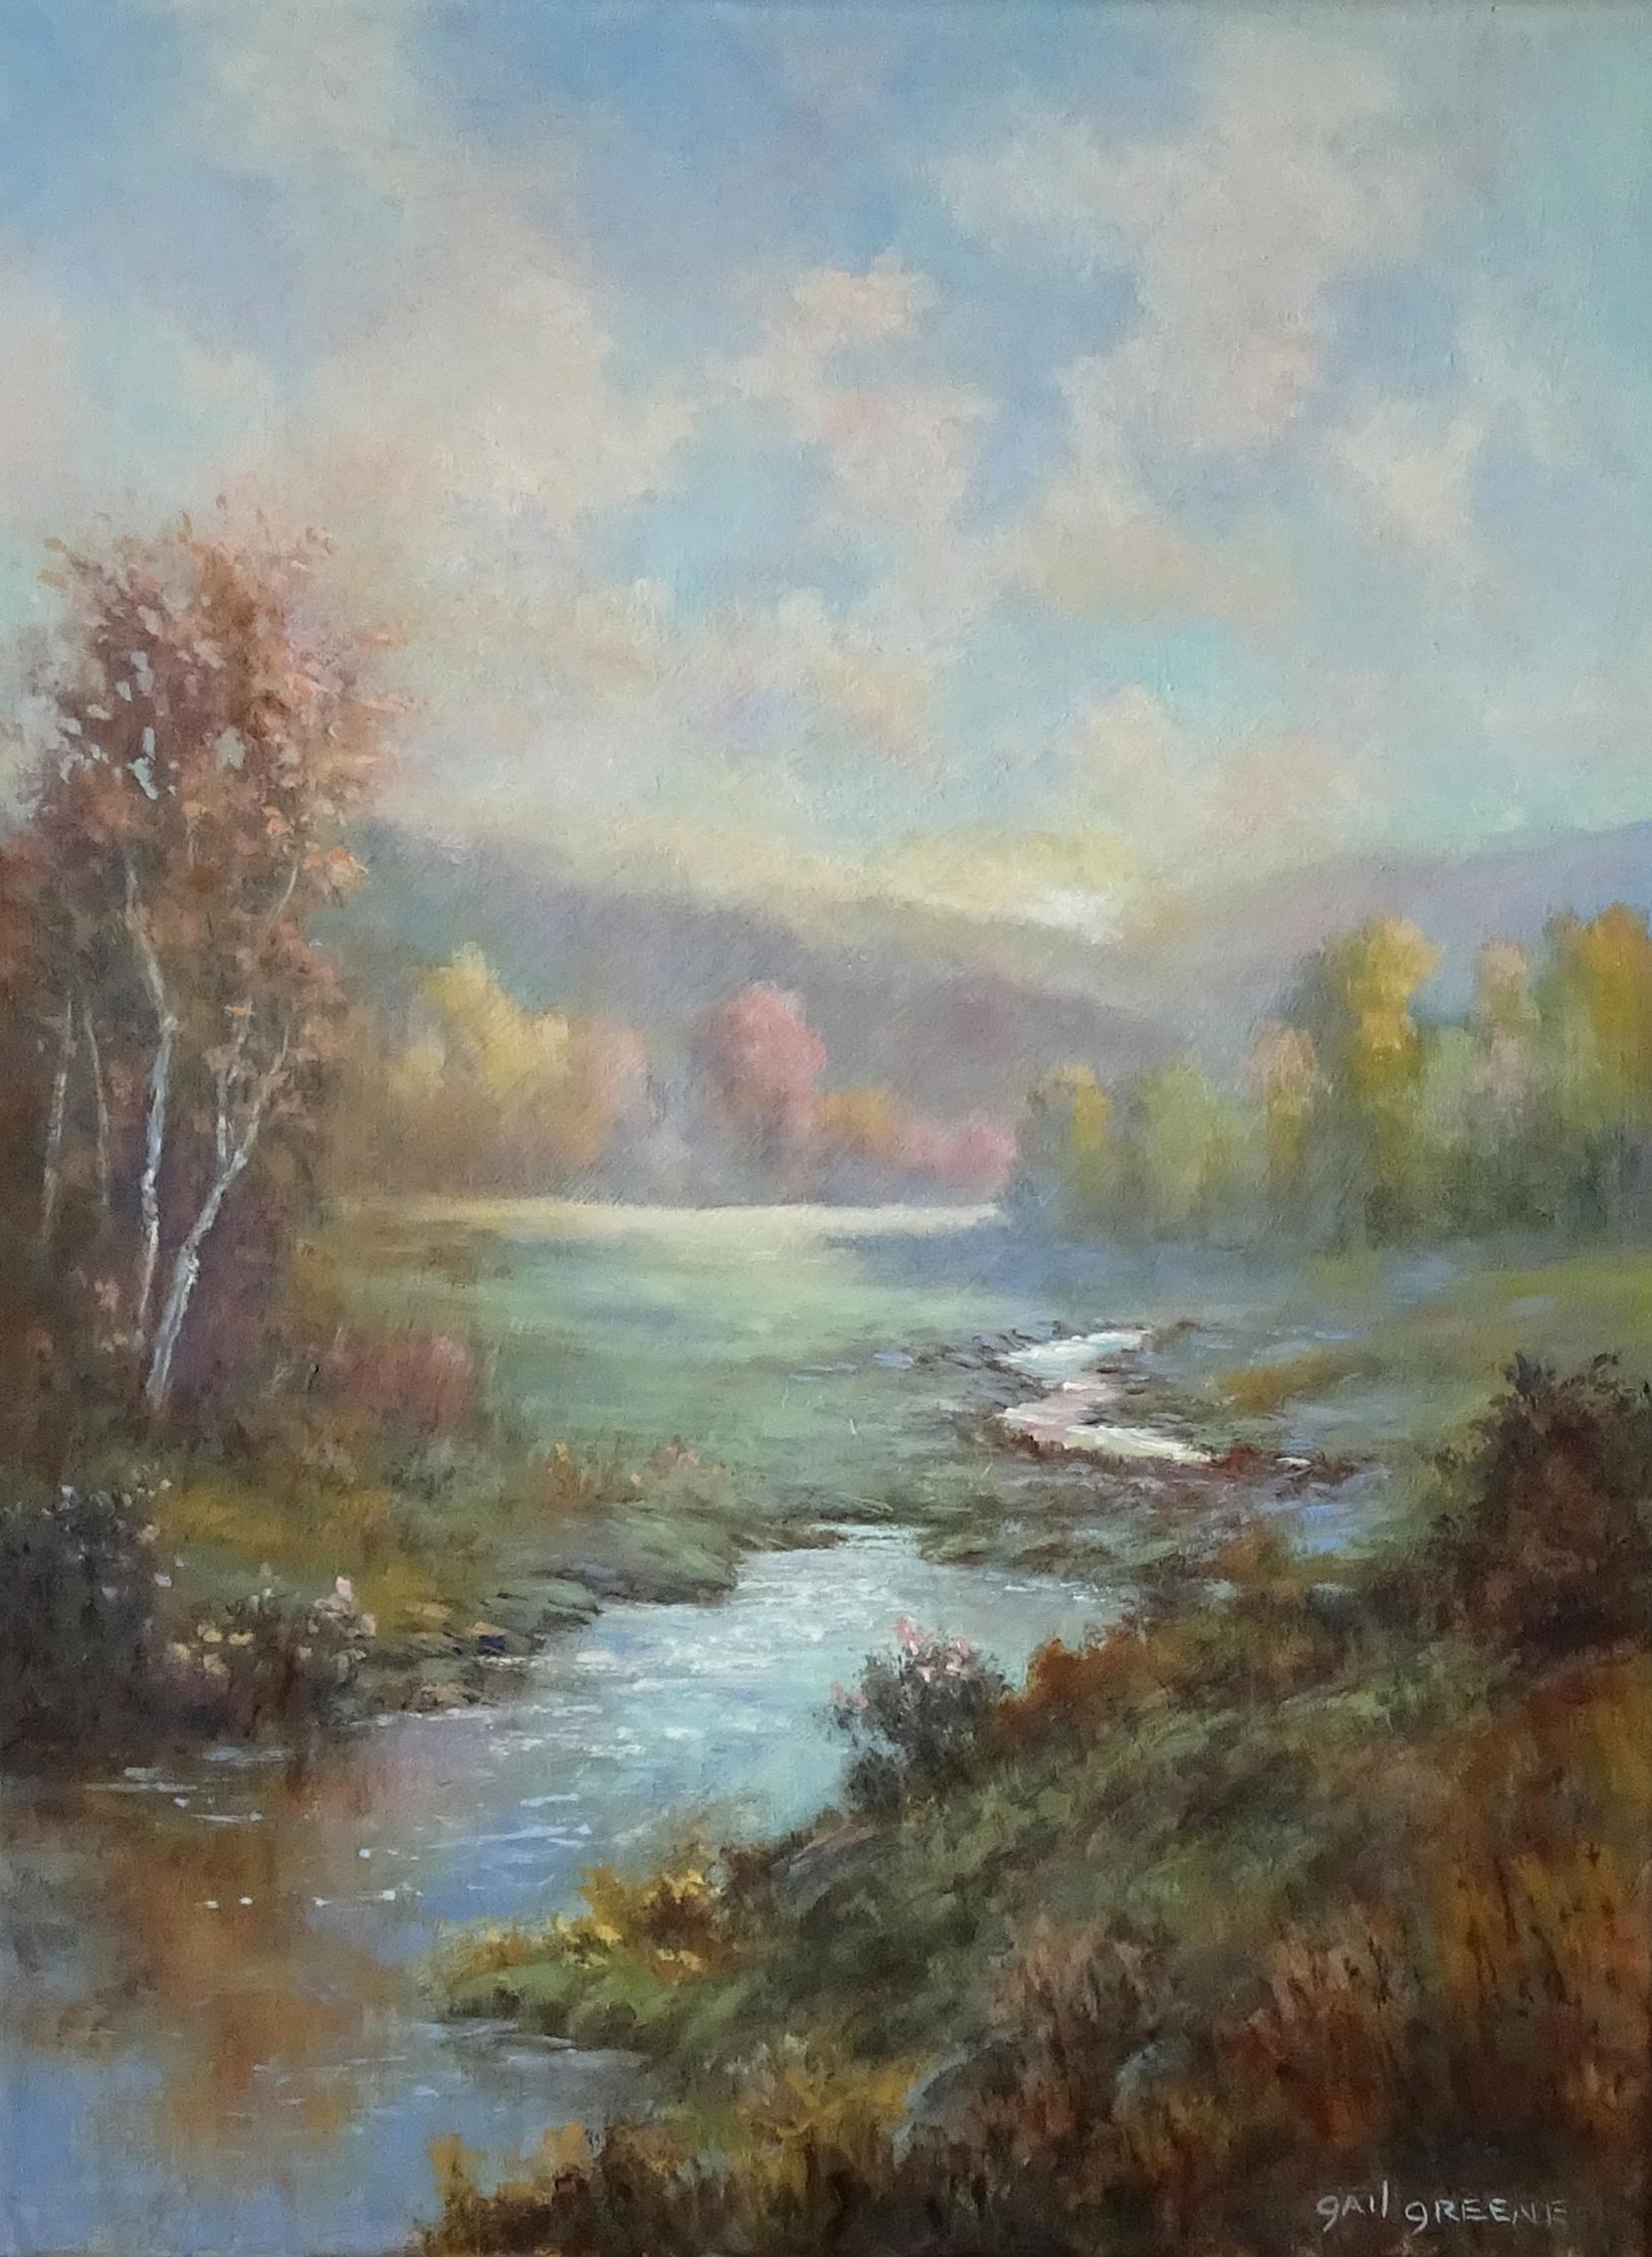 Gail Greene Landscape Painting - A Moment, Oil Painting